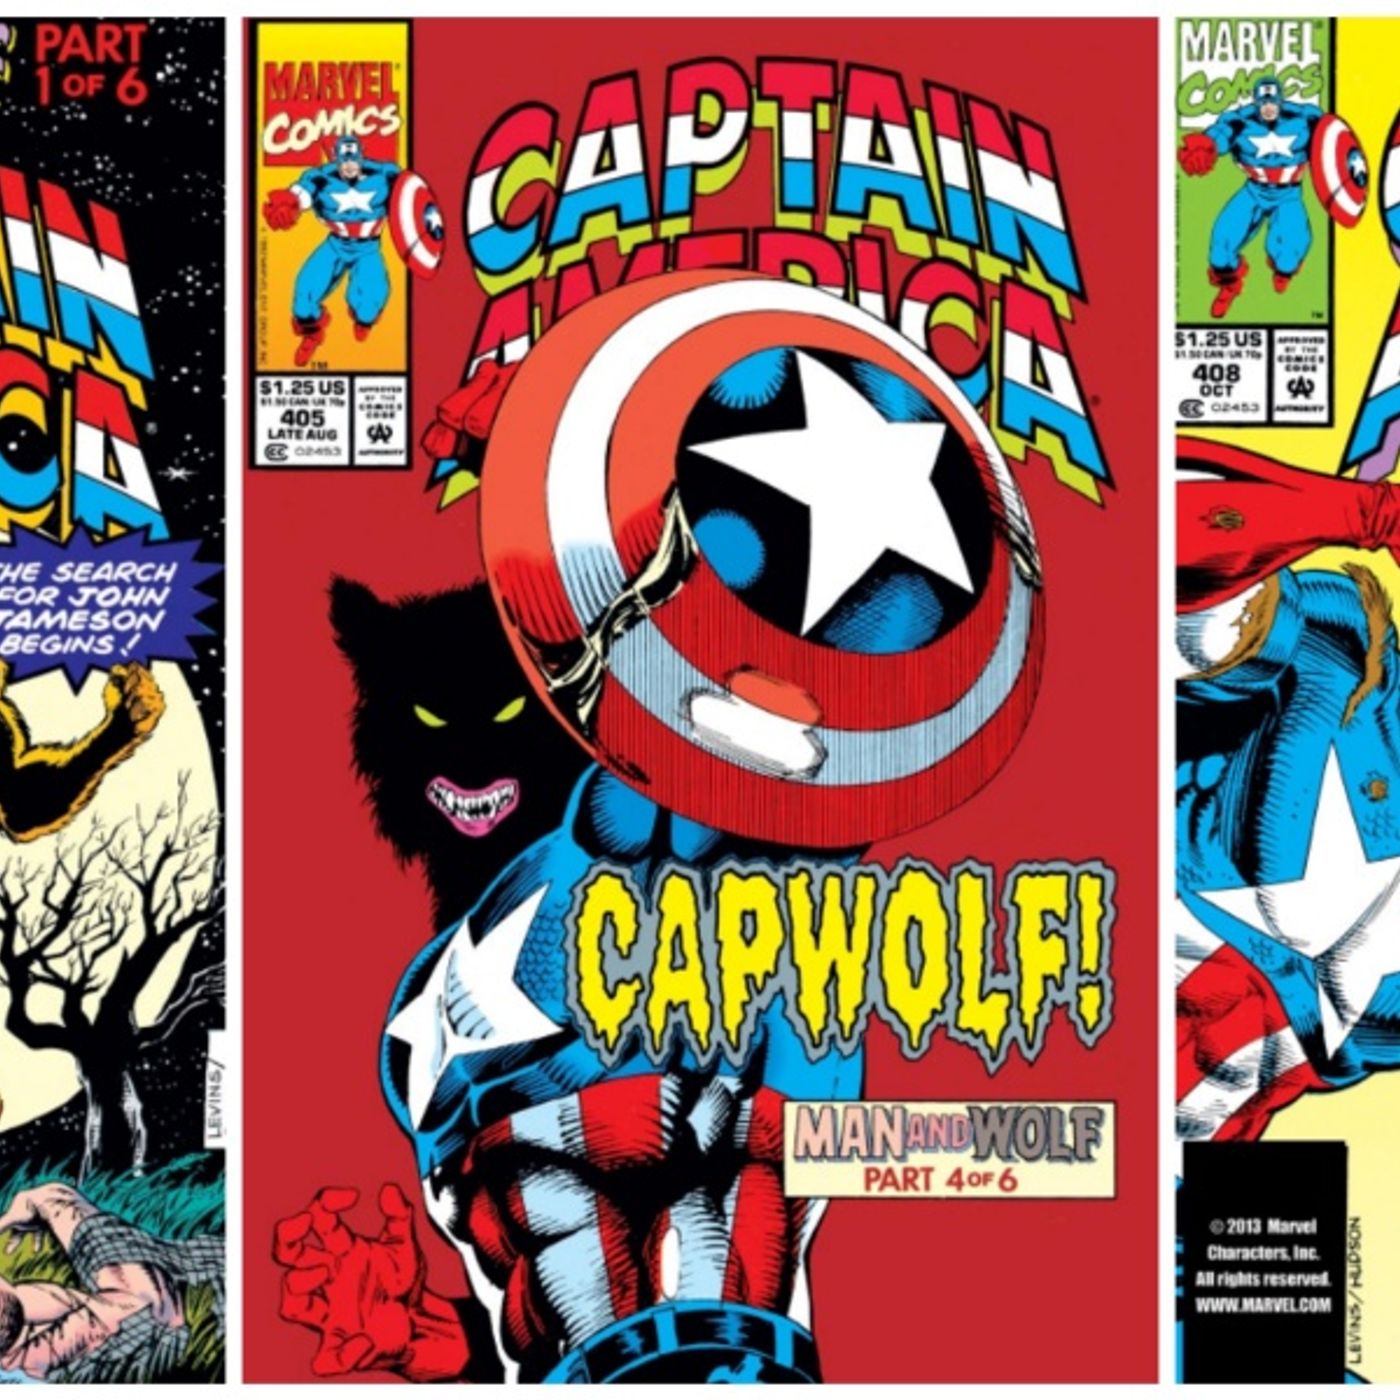 Unspoken Issues #89 - Captain America “Man and Wolf”